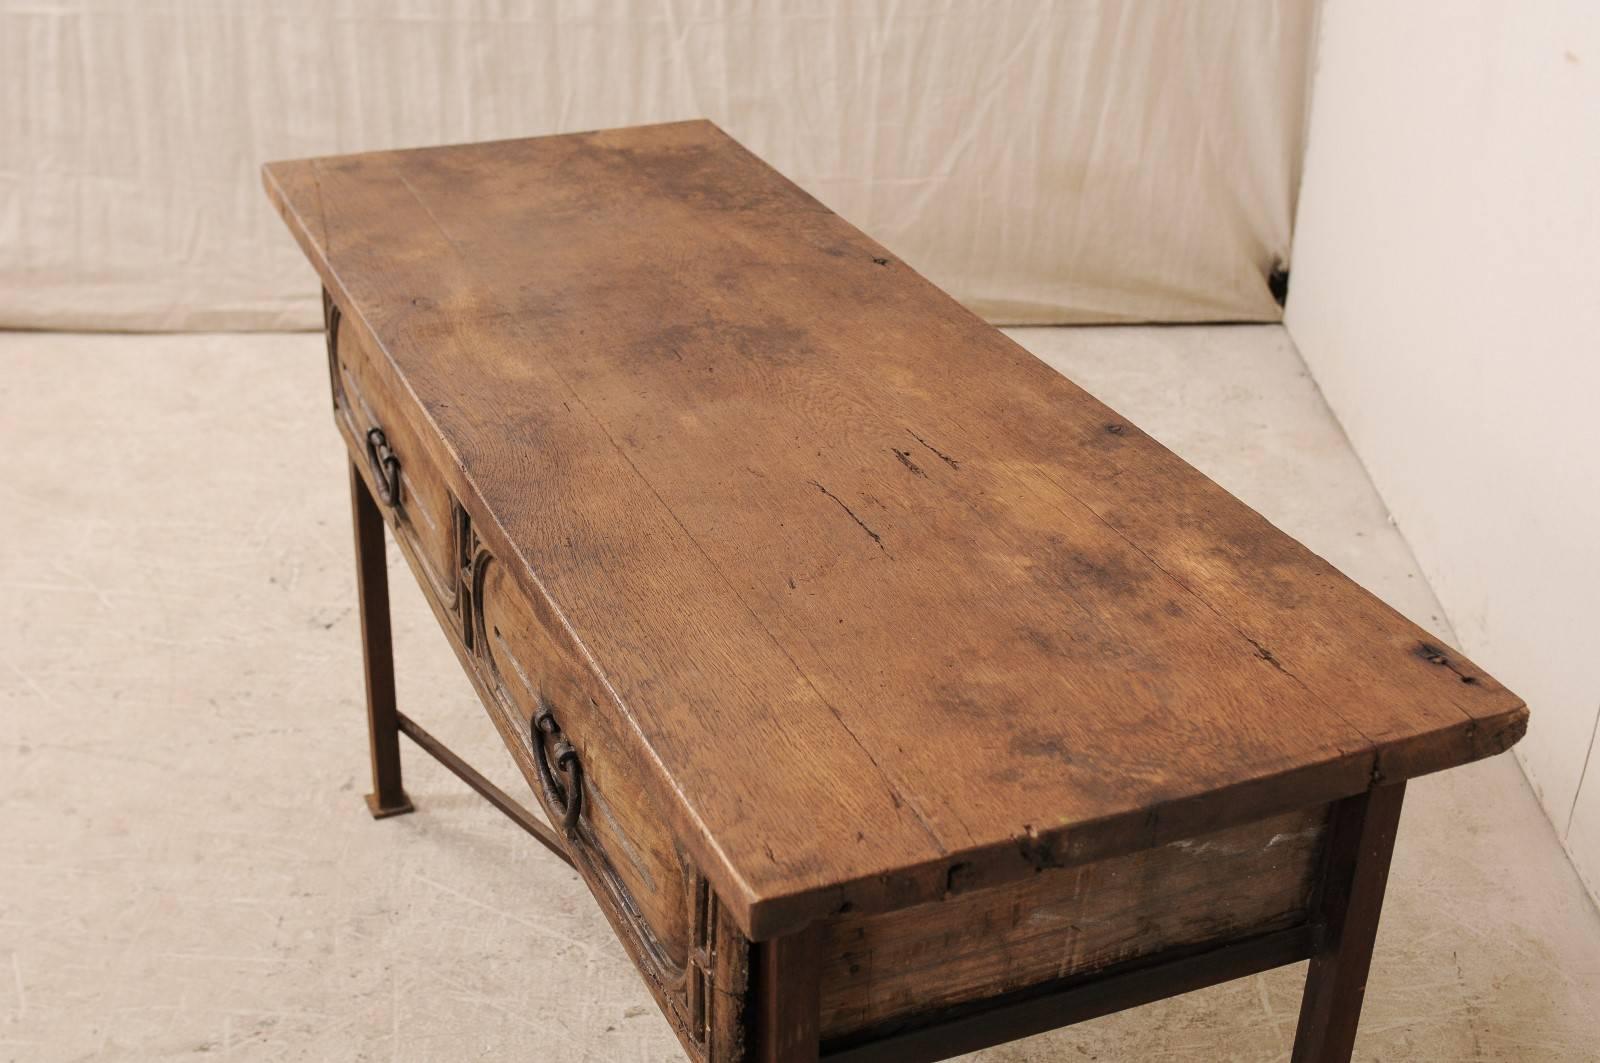 Metal 18th Century Spanish Rustic Wood and Iron Console Table with Spacious Drawer